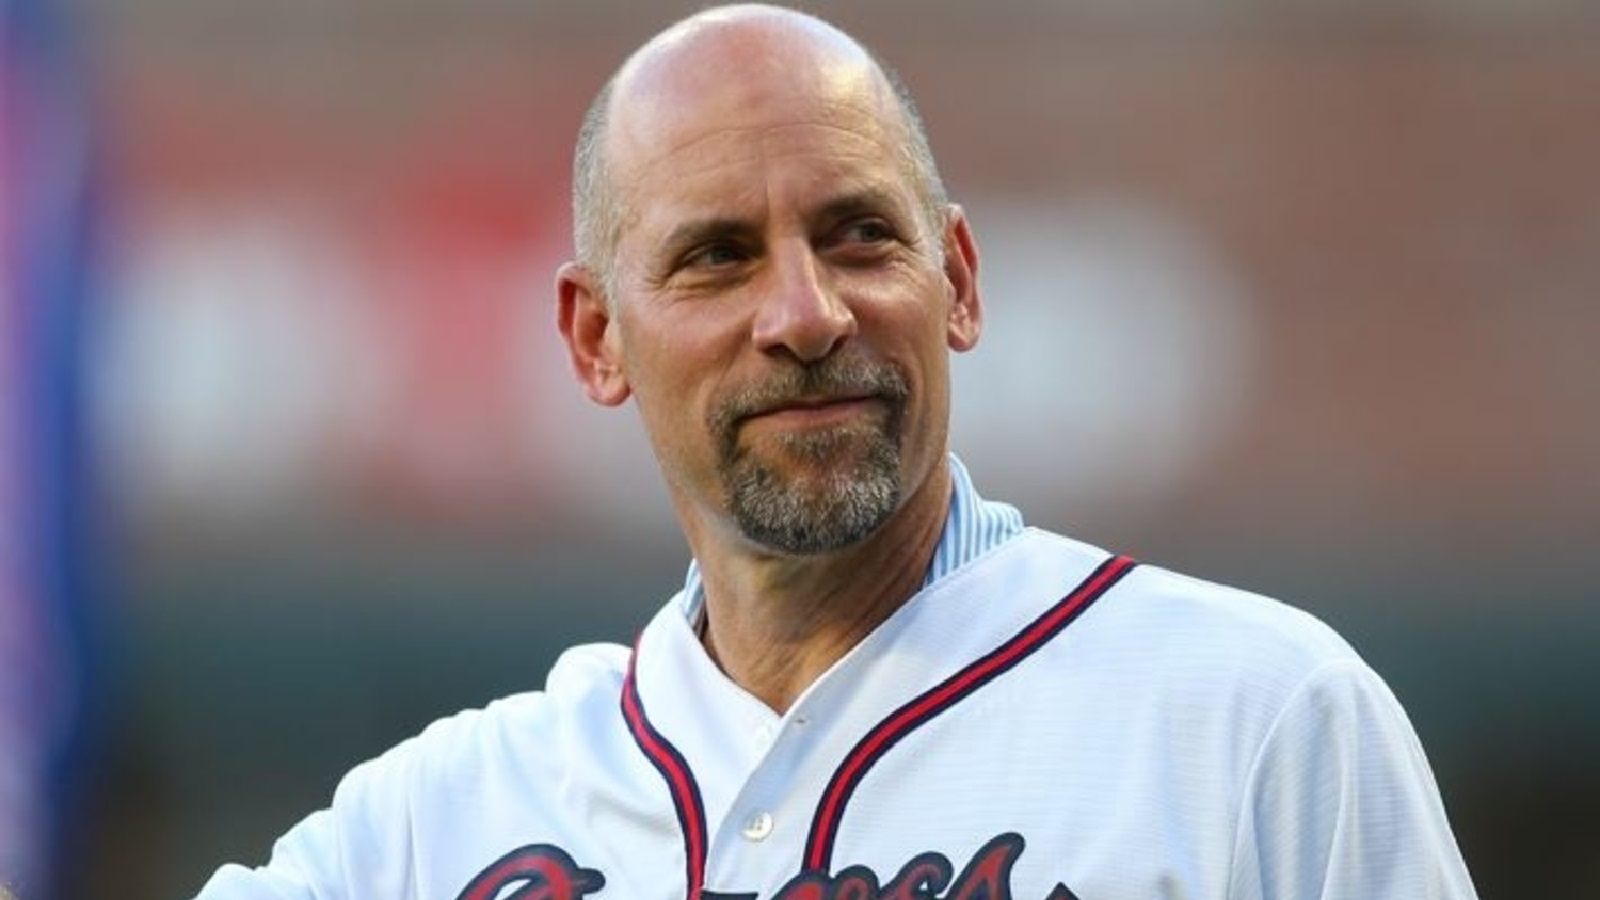 Twitter reacts to John Smoltz's incredible Bryce Harper prediction